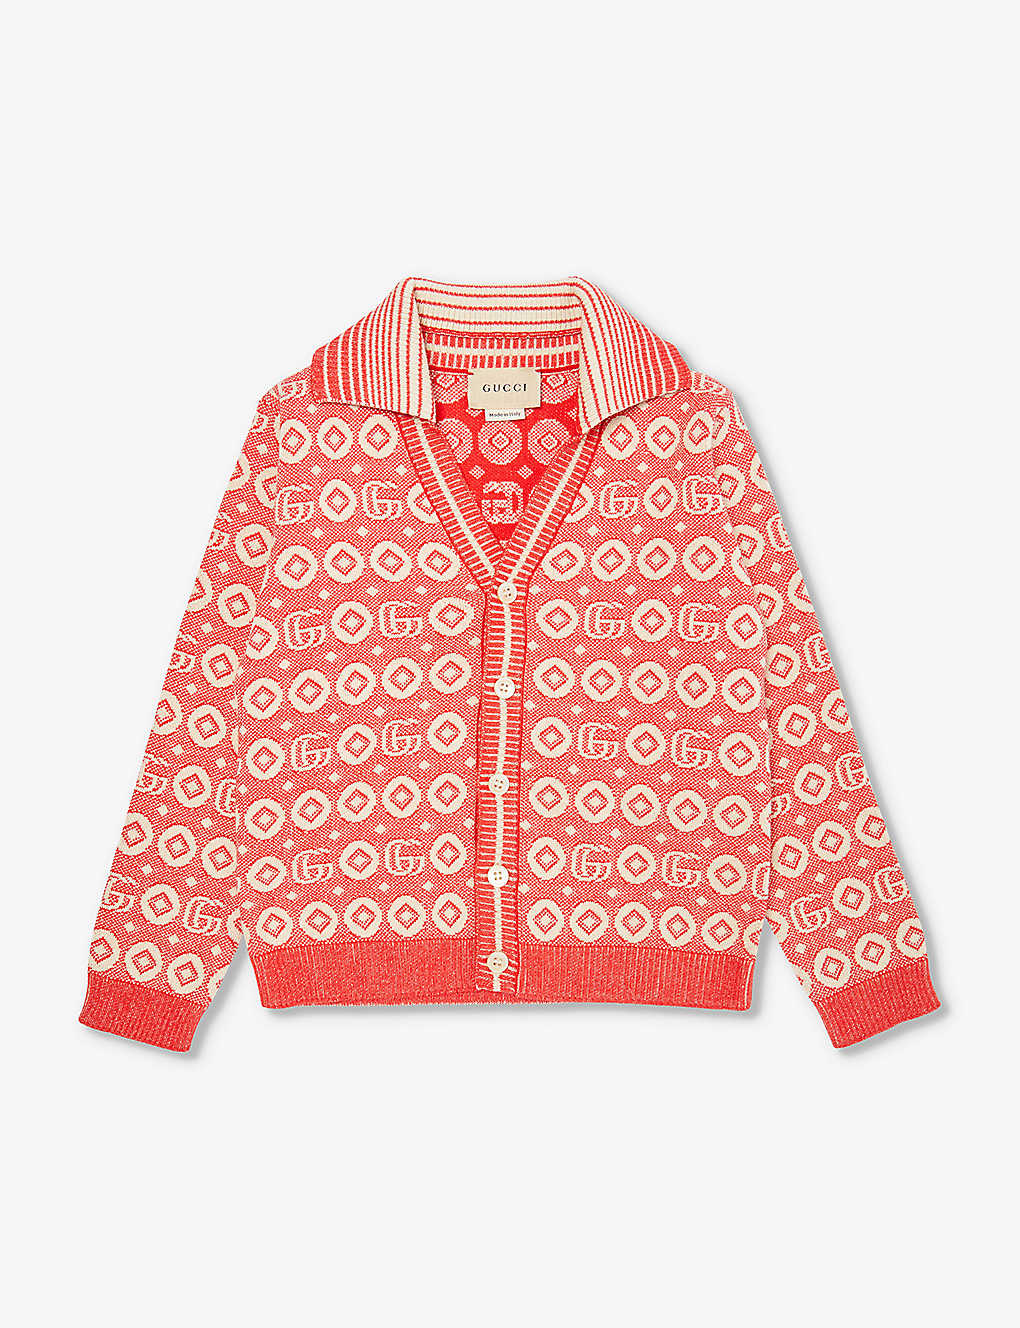 Gucci Kids' Double G Jacquard Cardigan 24-36 Months In Red/beige